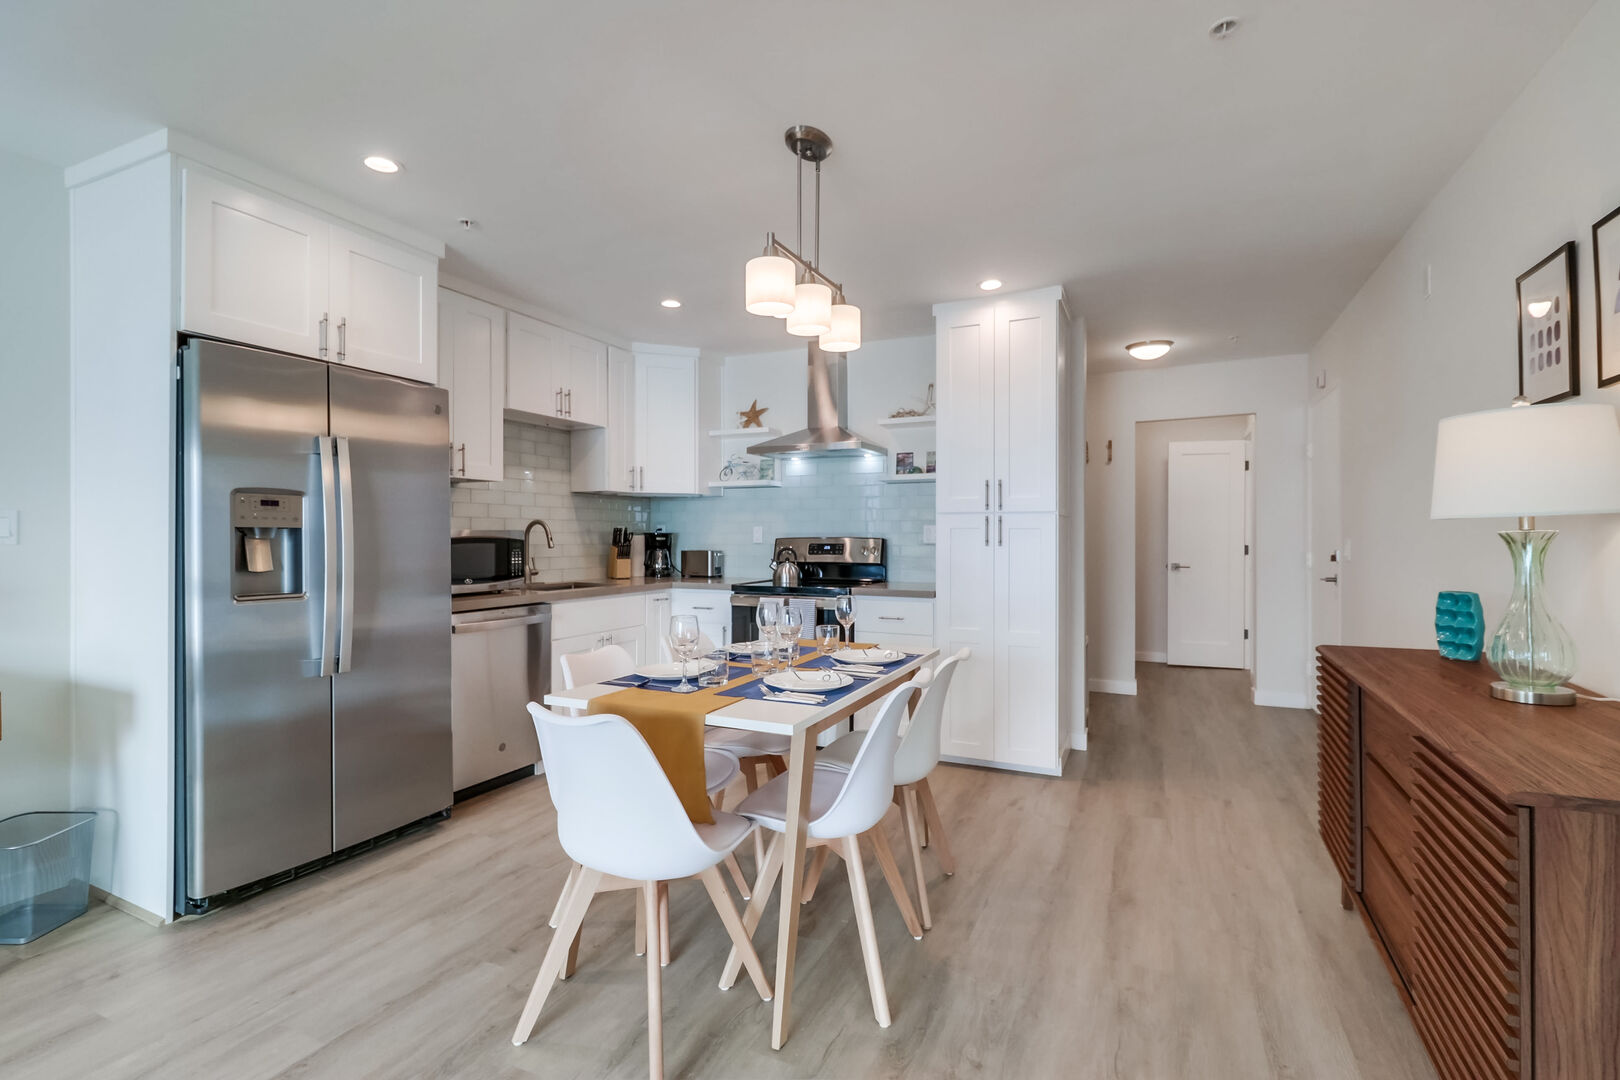 Open-style kitchen with modern, minimalist decor, stainless steel appliances and dining for 5 guests. The back foyer is the front entrance to the condo with the guest bedroom and separate bathroom